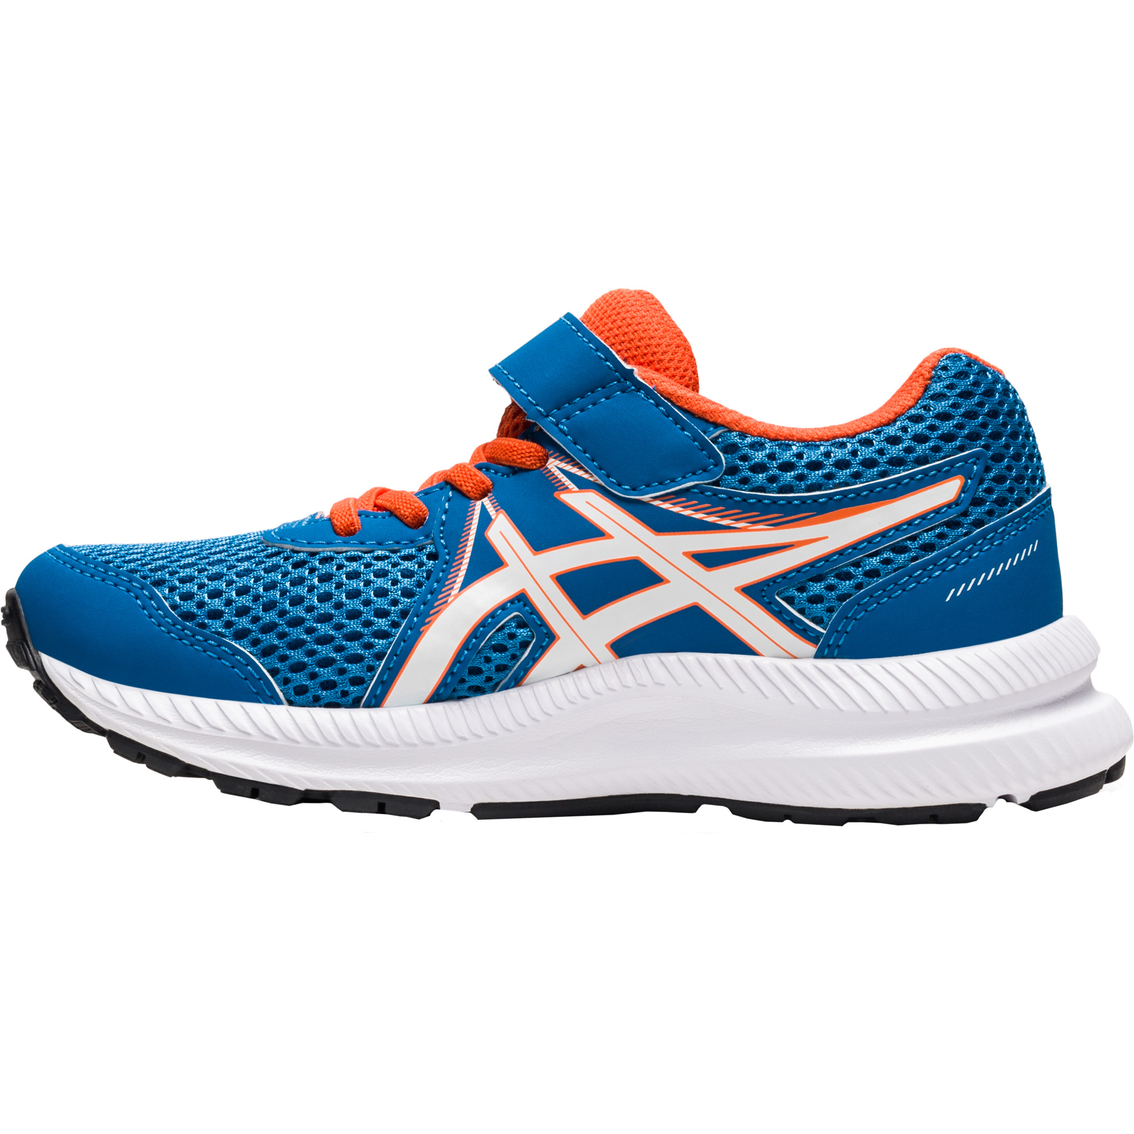 ASICS Preschool Boys Pre Contend 7 Running Shoes - Image 2 of 7